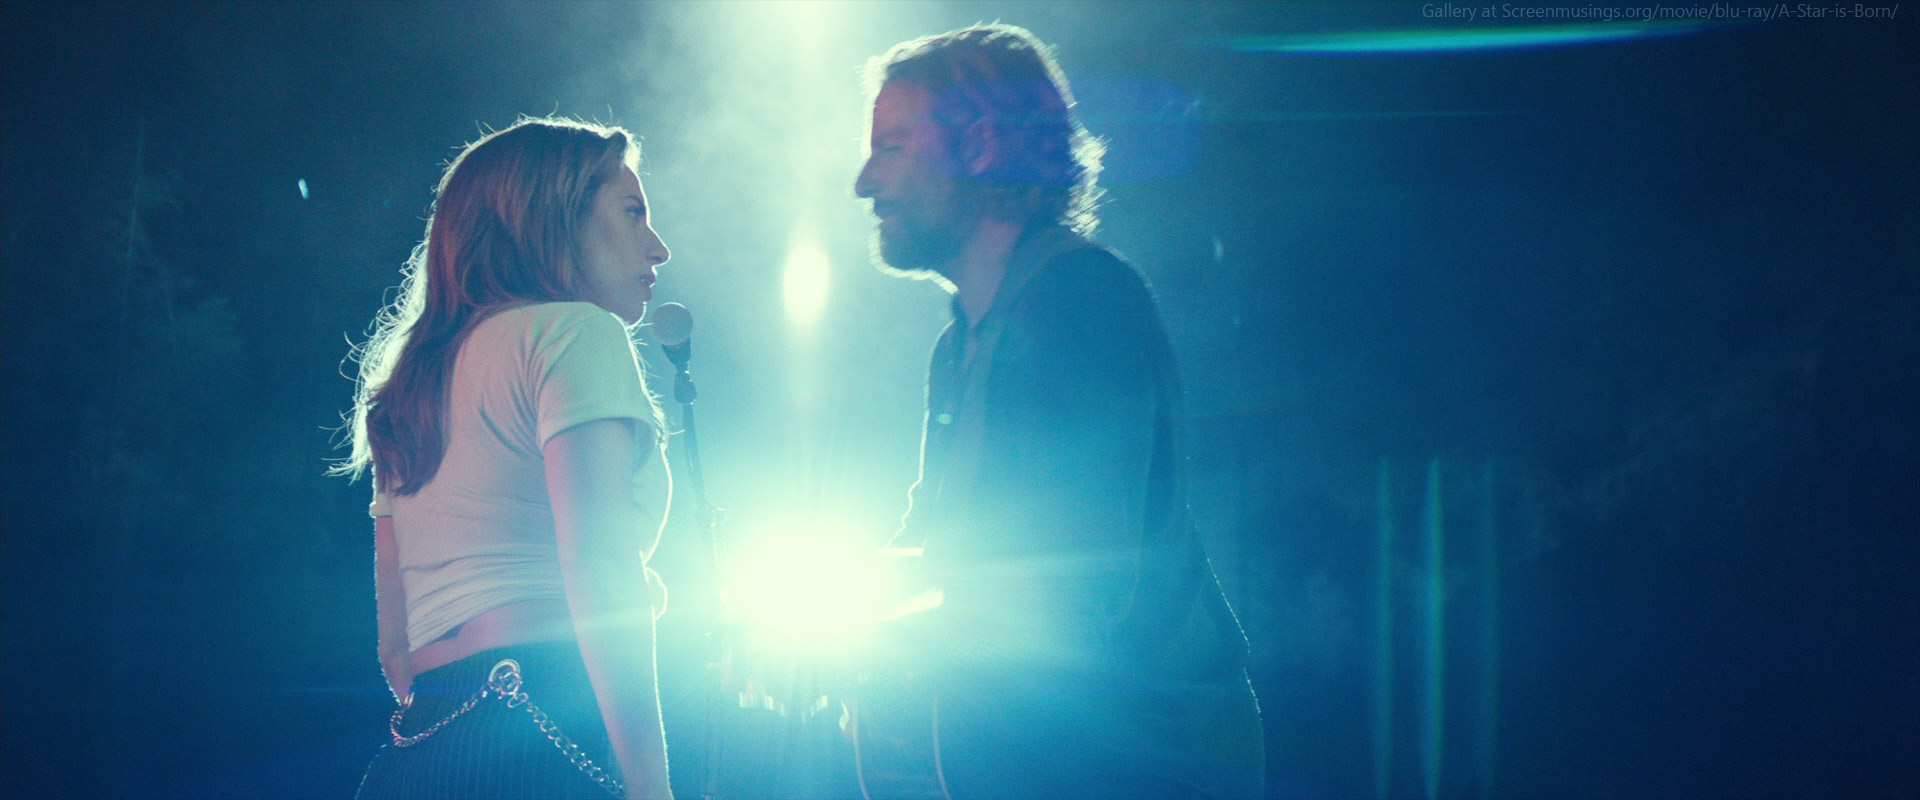 a star is born 2018 torrent download yify